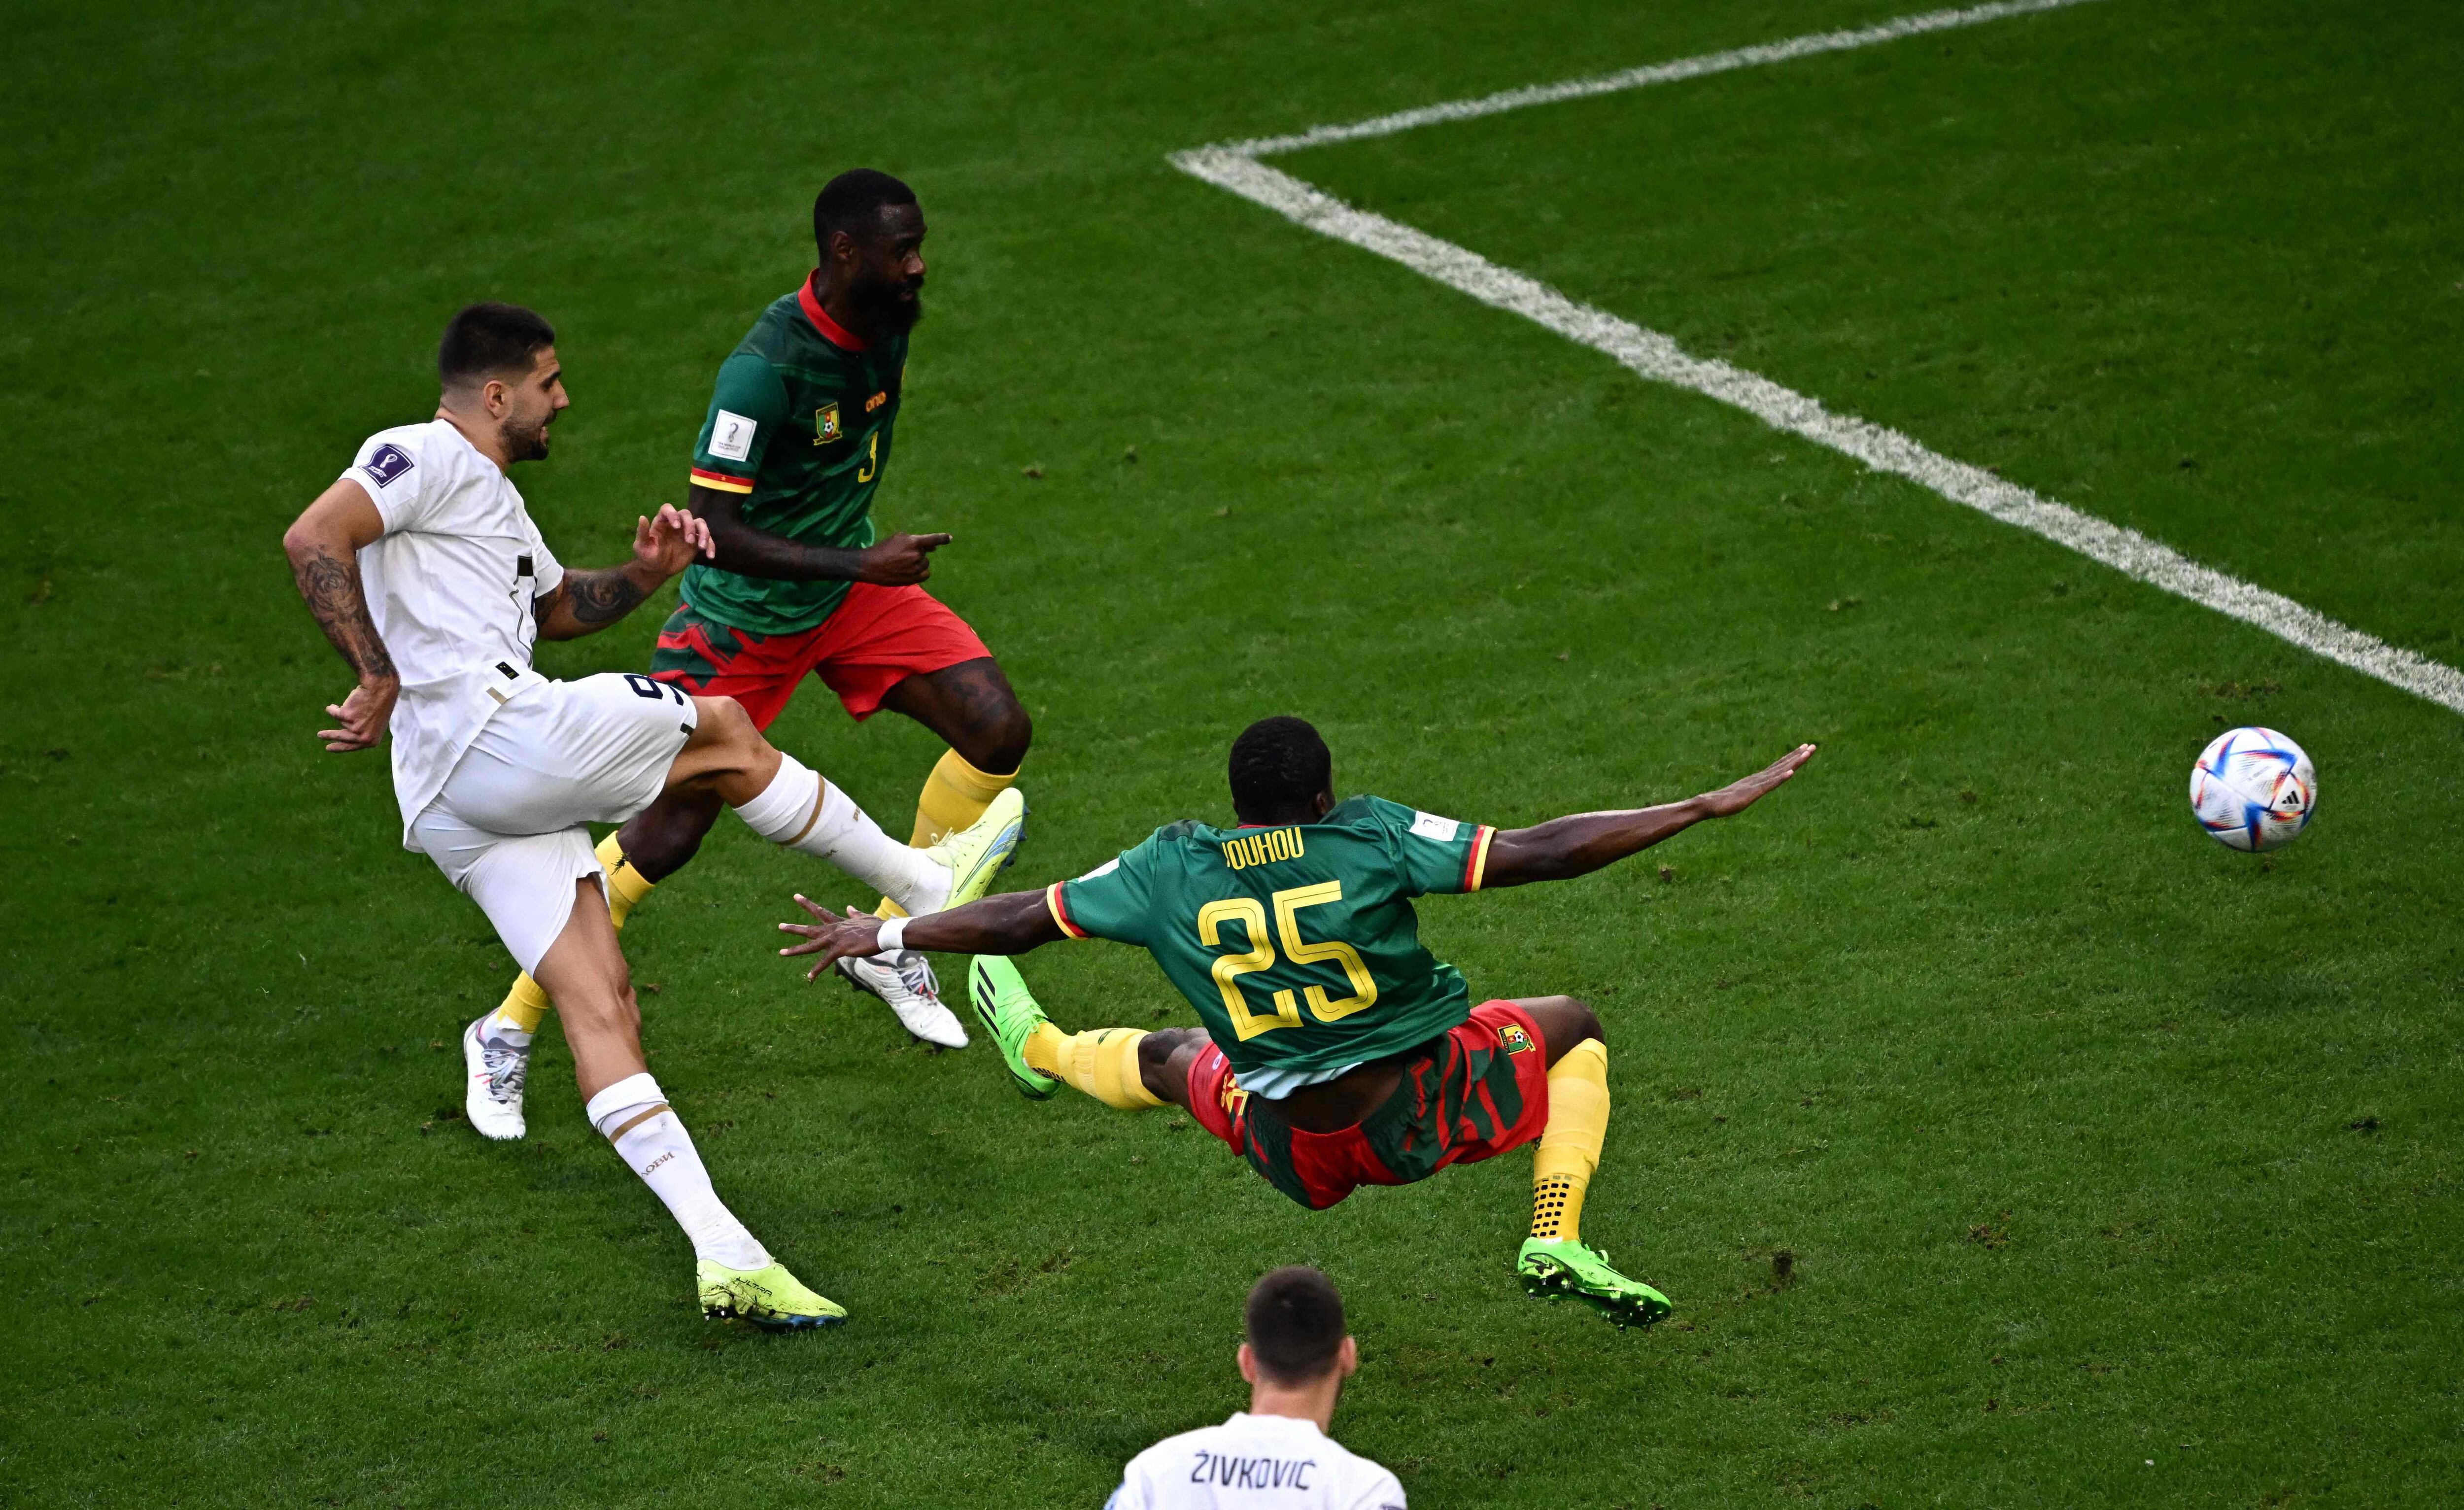 (From L) Serbia's forward #09 Aleksandar Mitrovic kicks the ball past Cameroon's defender #03 Nicolas Nkoulou and Cameroon's defender #25 Nouhou Tolo during the Qatar 2022 World Cup Group G football match between Cameroon and Serbia at the Al-Janoub Stadium in Al-Wakrah, south of Doha on November 28, 2022. (Photo by Anne-Christine POUJOULAT / AFP)